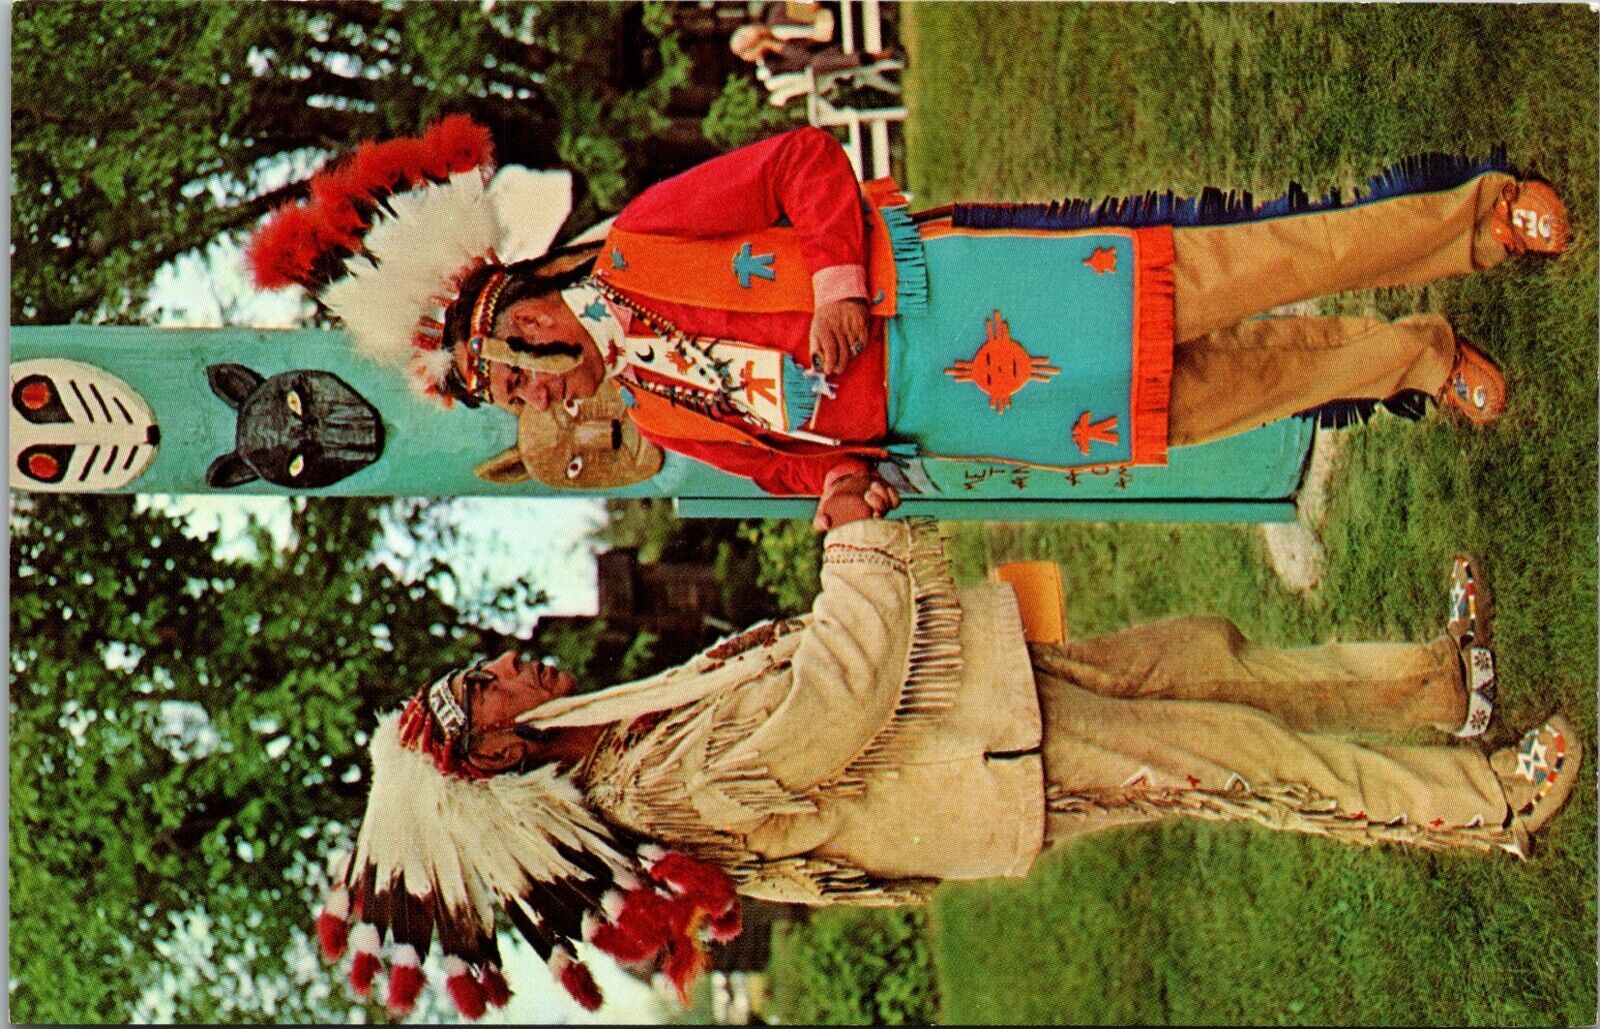 WYALUSING, PA ~ Meeting of CHIEF LOUD VOICE & CHIEF LIGHT FOOT c1950s Postcard